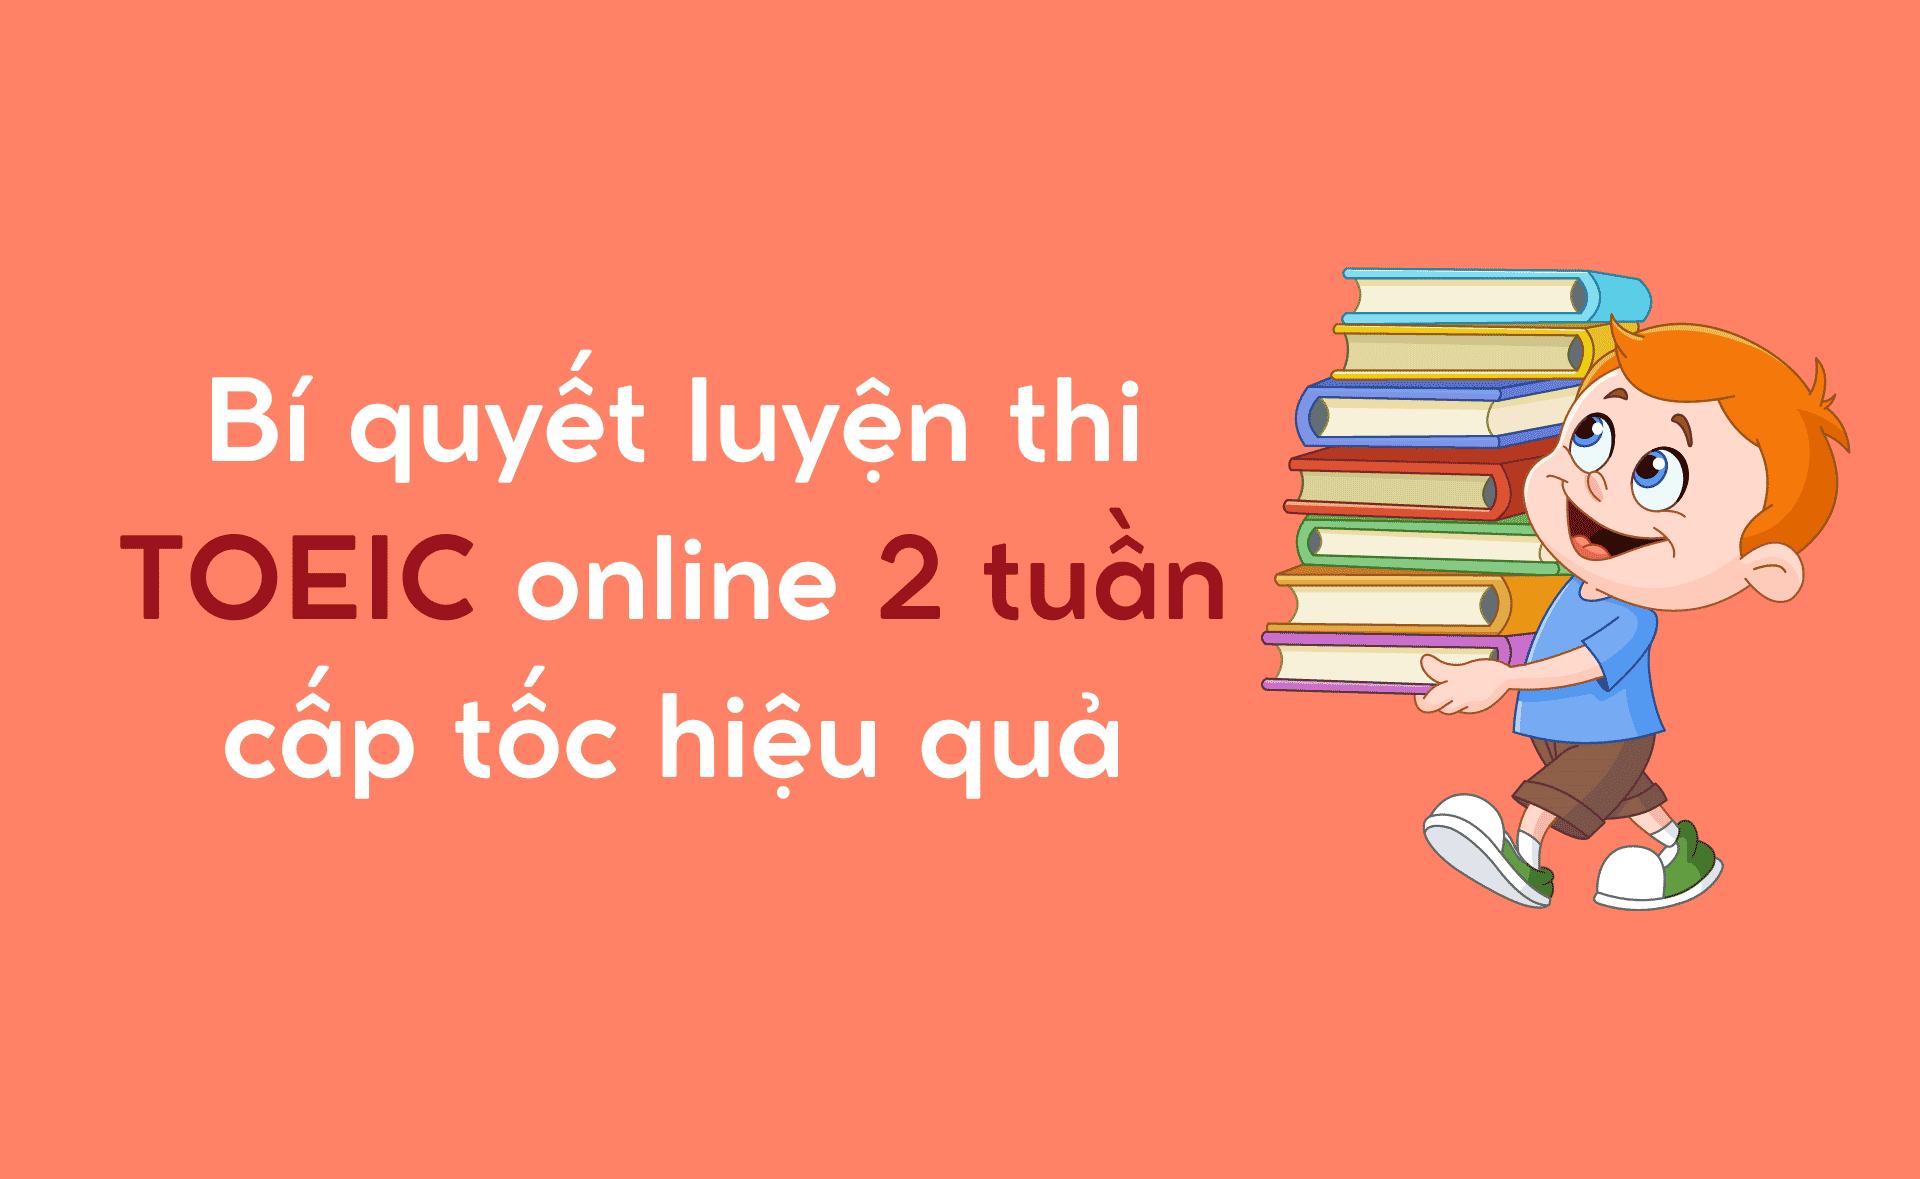 luyện thi toeic online 2 tuần